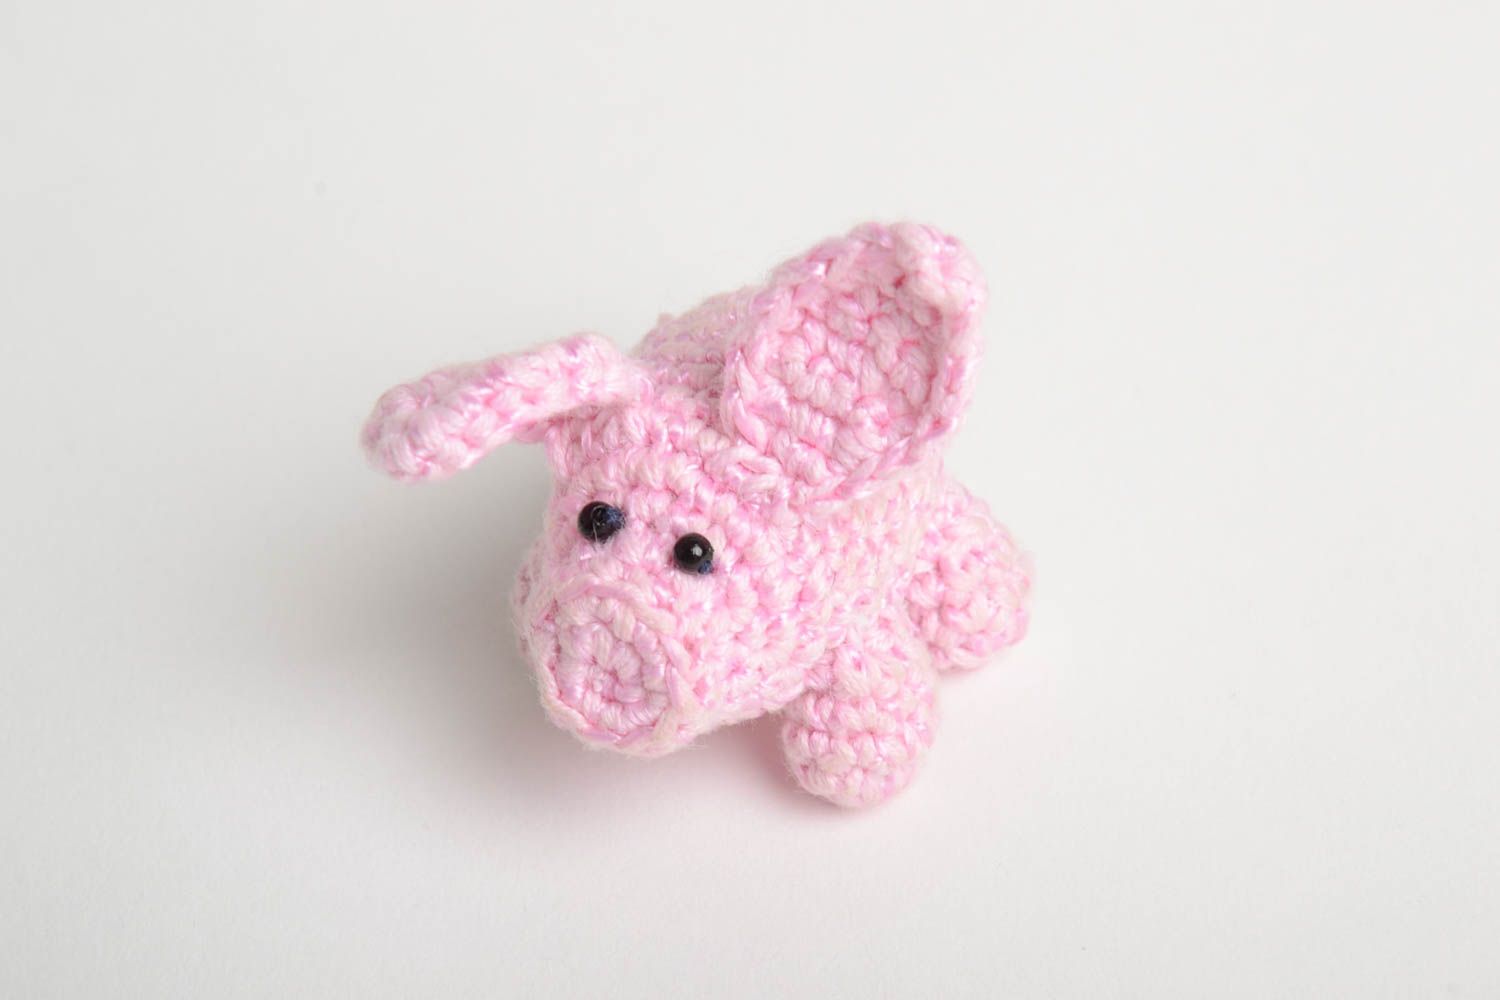 Crocheted pink soft toy cute handmade piglet soft toys children gifts ideas photo 4